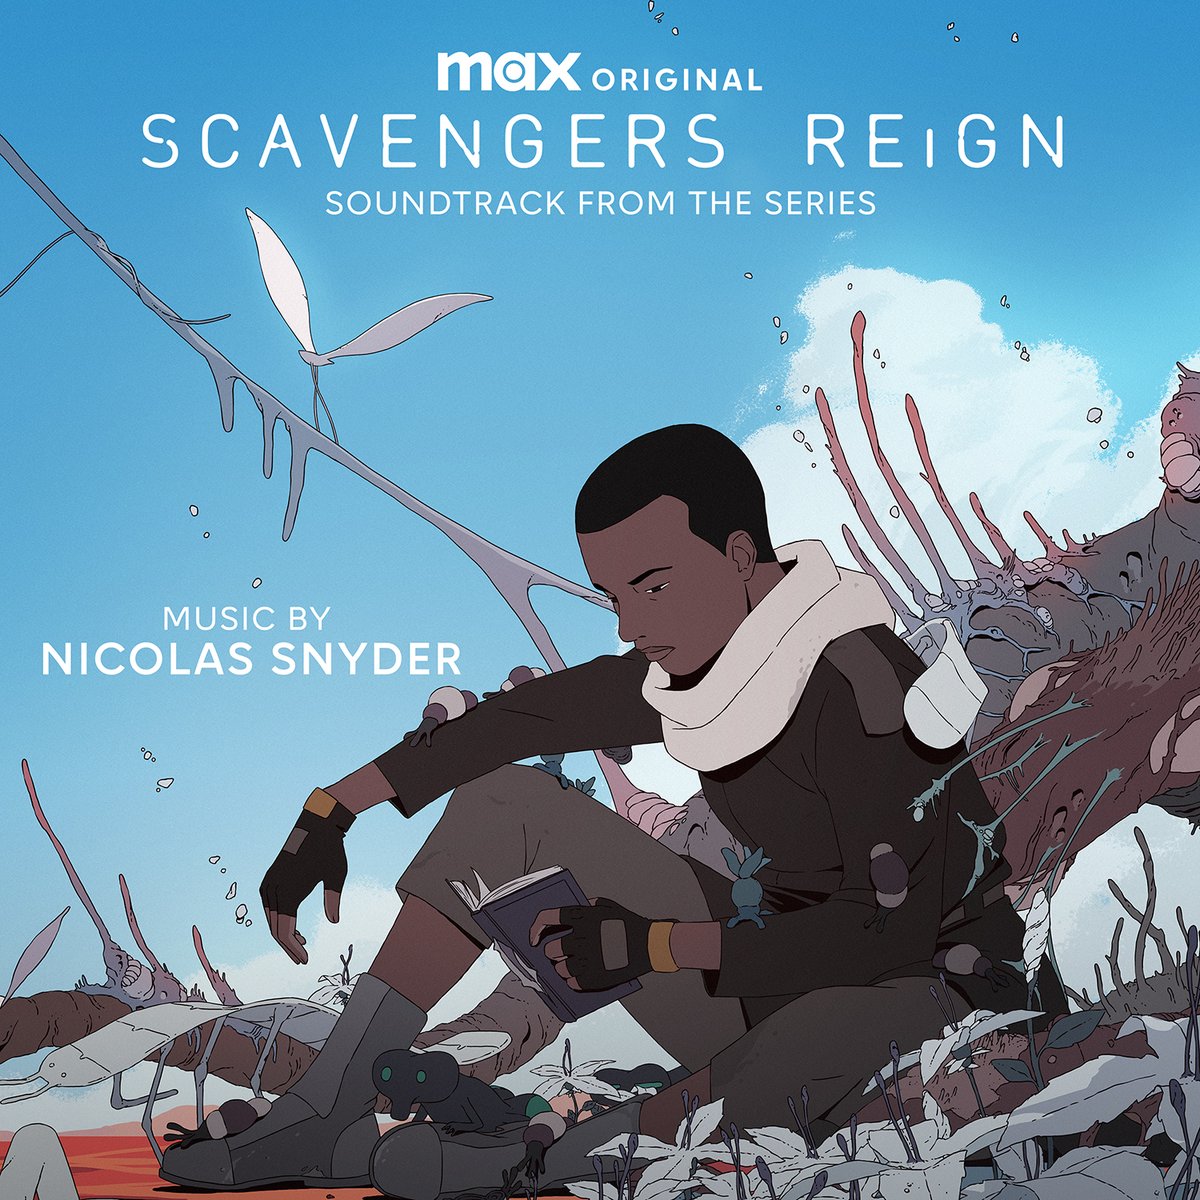 At long last, the soundtrack to #ScavengersReign is out today! Released this past fall to critical acclaim, the Max Original animated sci-fi series from @charleshuettner & @josephbennett00 features a lush, hauntingly beautiful original score from composer Nicolas Snyder 🌱👽